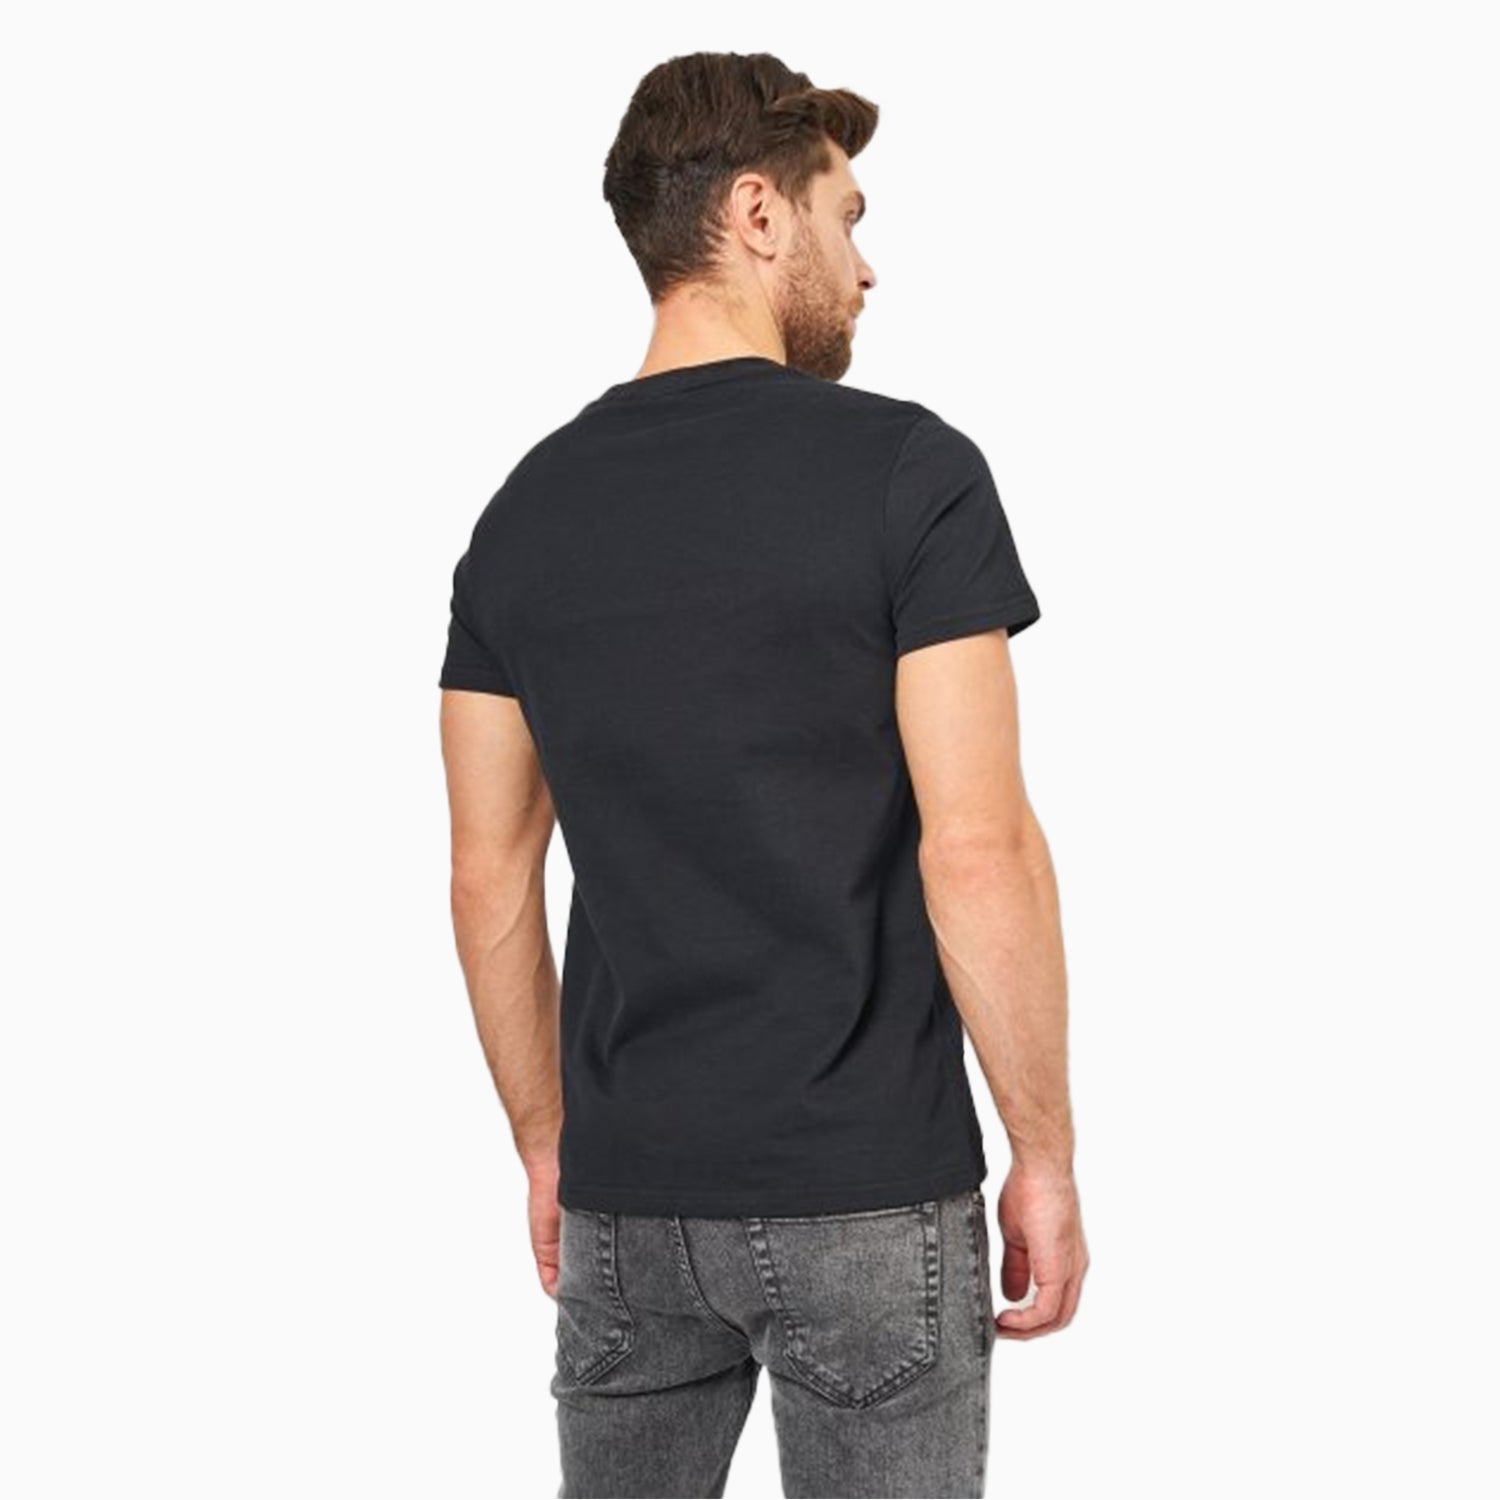 Superdry Men's Crew Neck Short Sleeve T Shirt - Color: Black, Optic White - Tops and Bottoms USA -